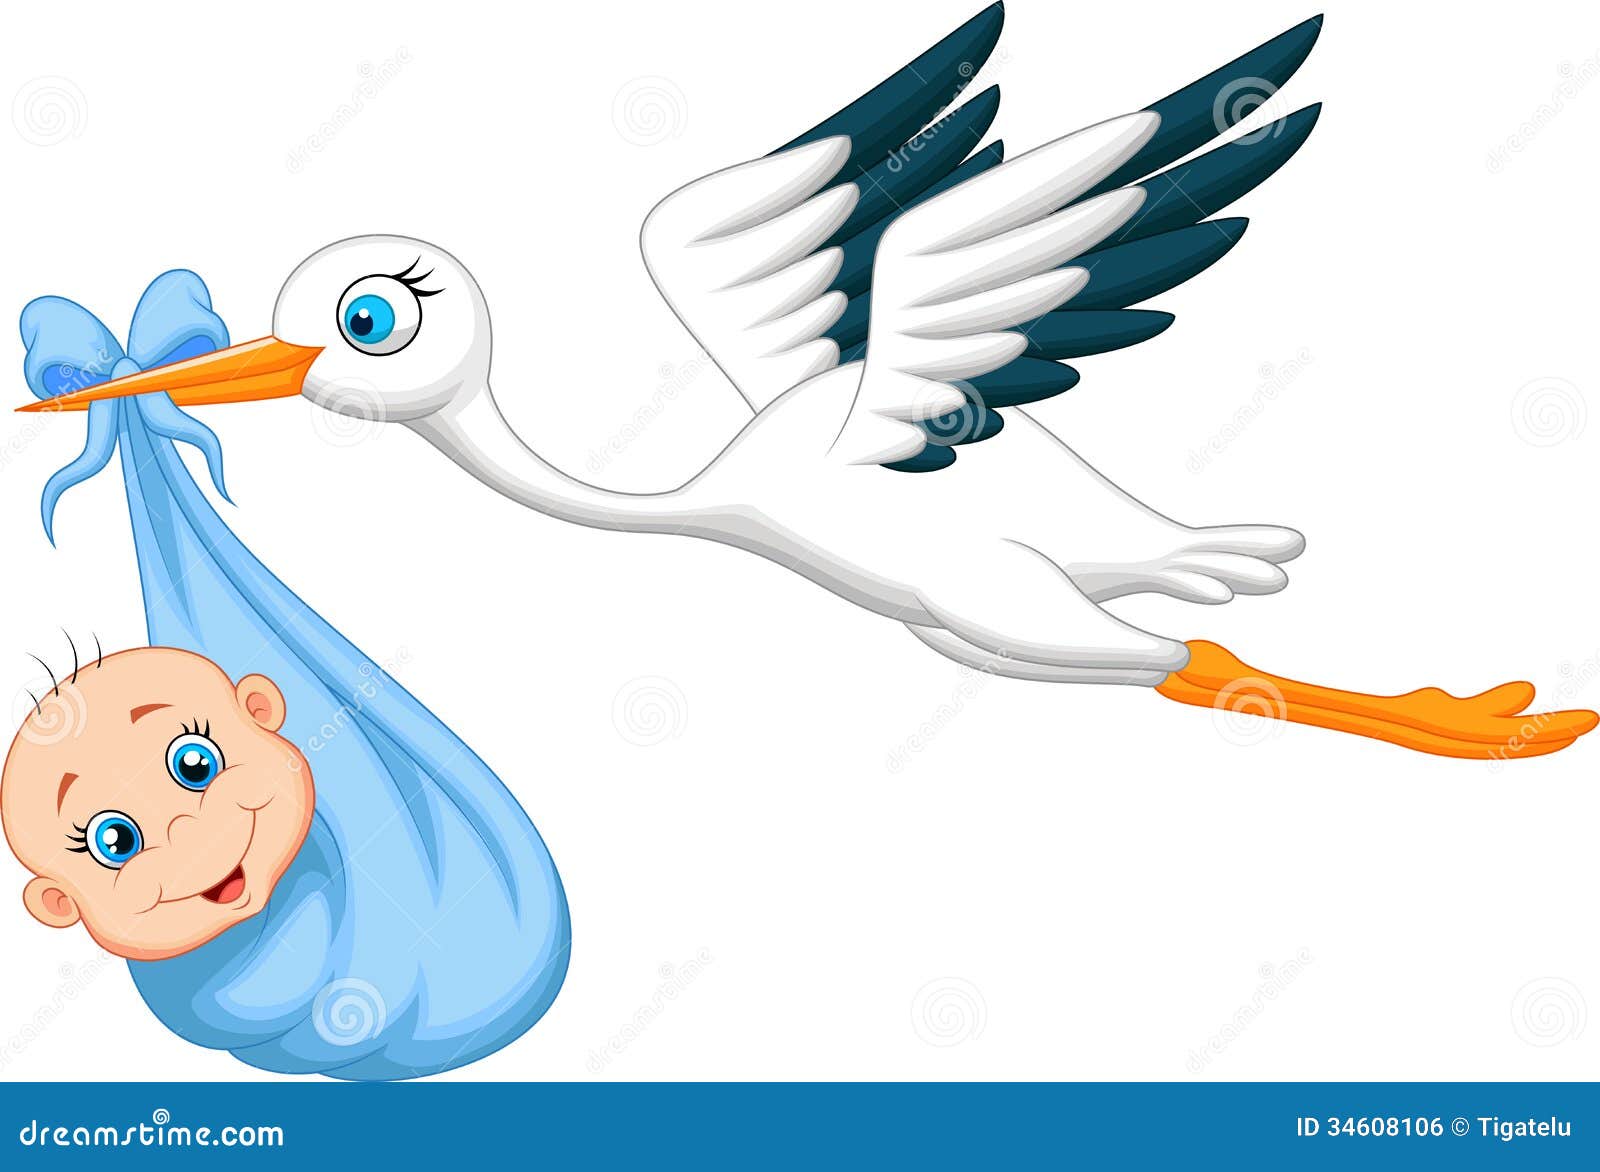 clipart baby storch - photo #44